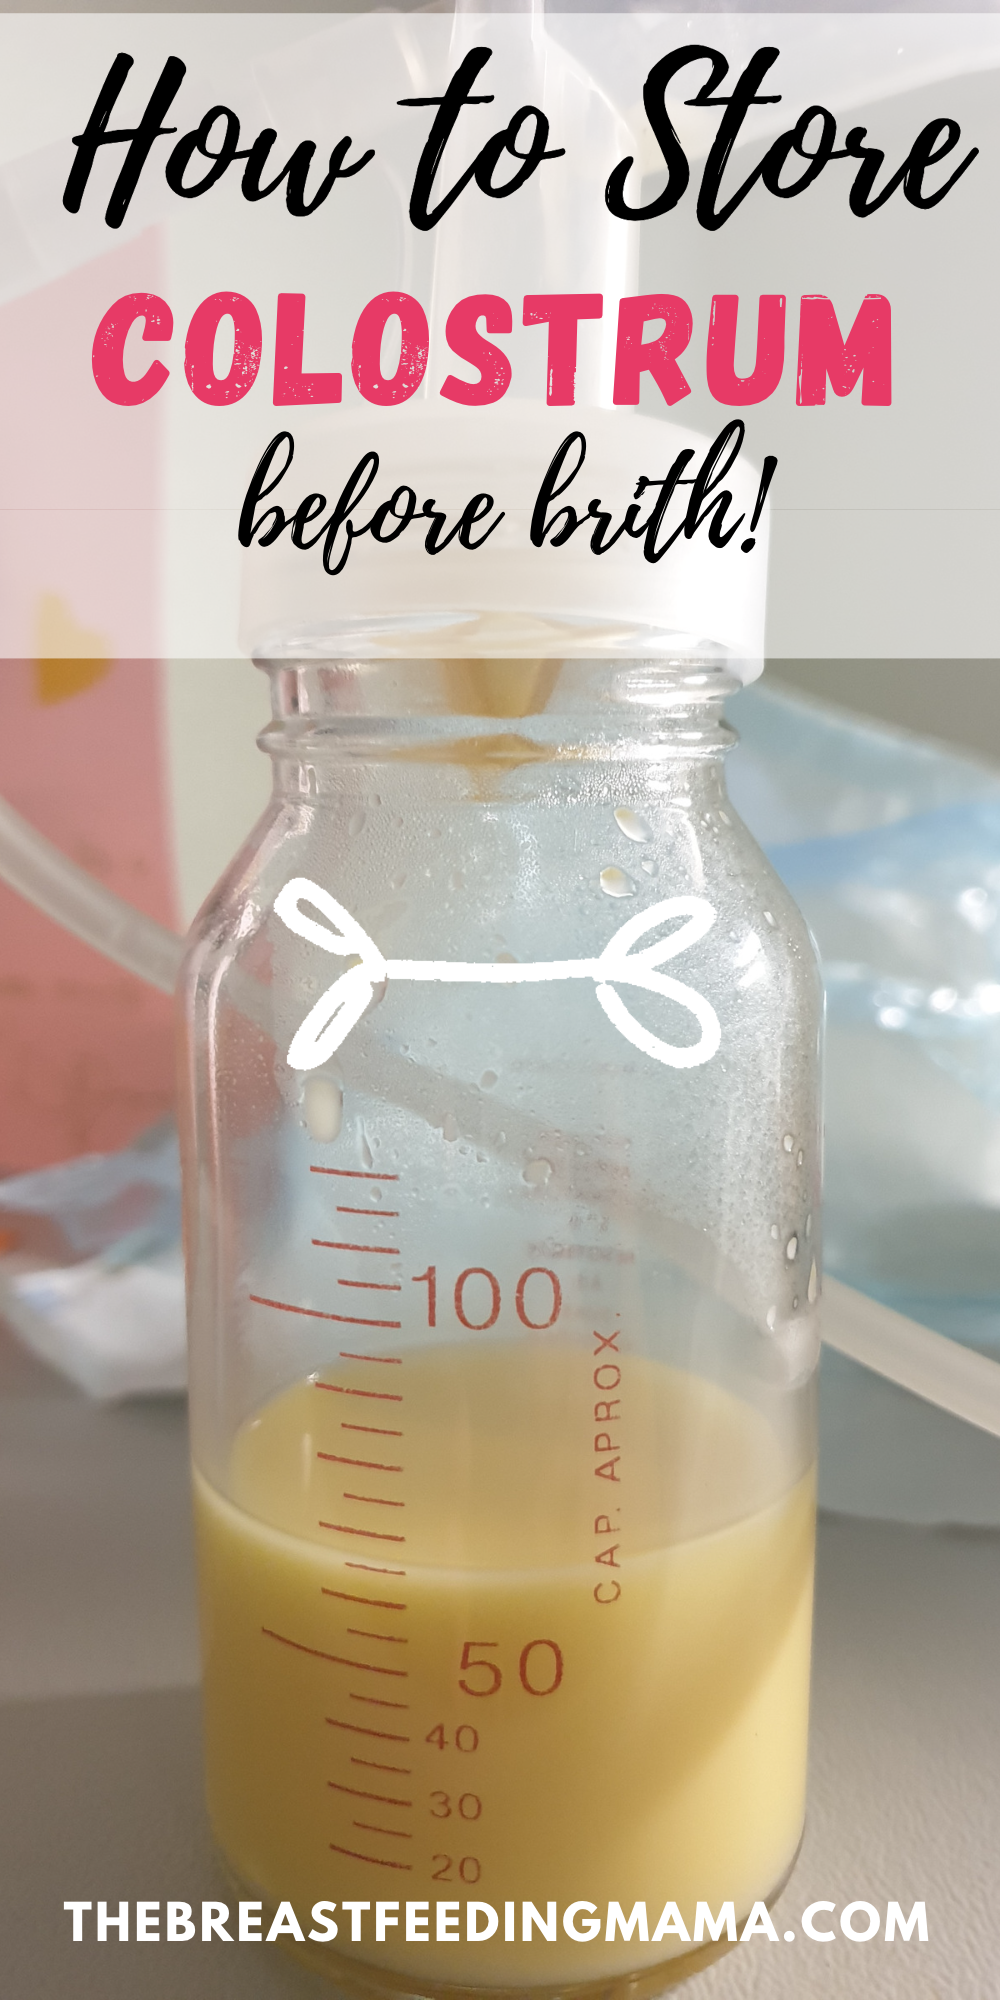 Expressing colostrum before birth can have many benefits. In this article, we will share everything you need to know about how to store colostrum before birth to ensure ease-of-use and safe feeding conditions for your newborn baby.